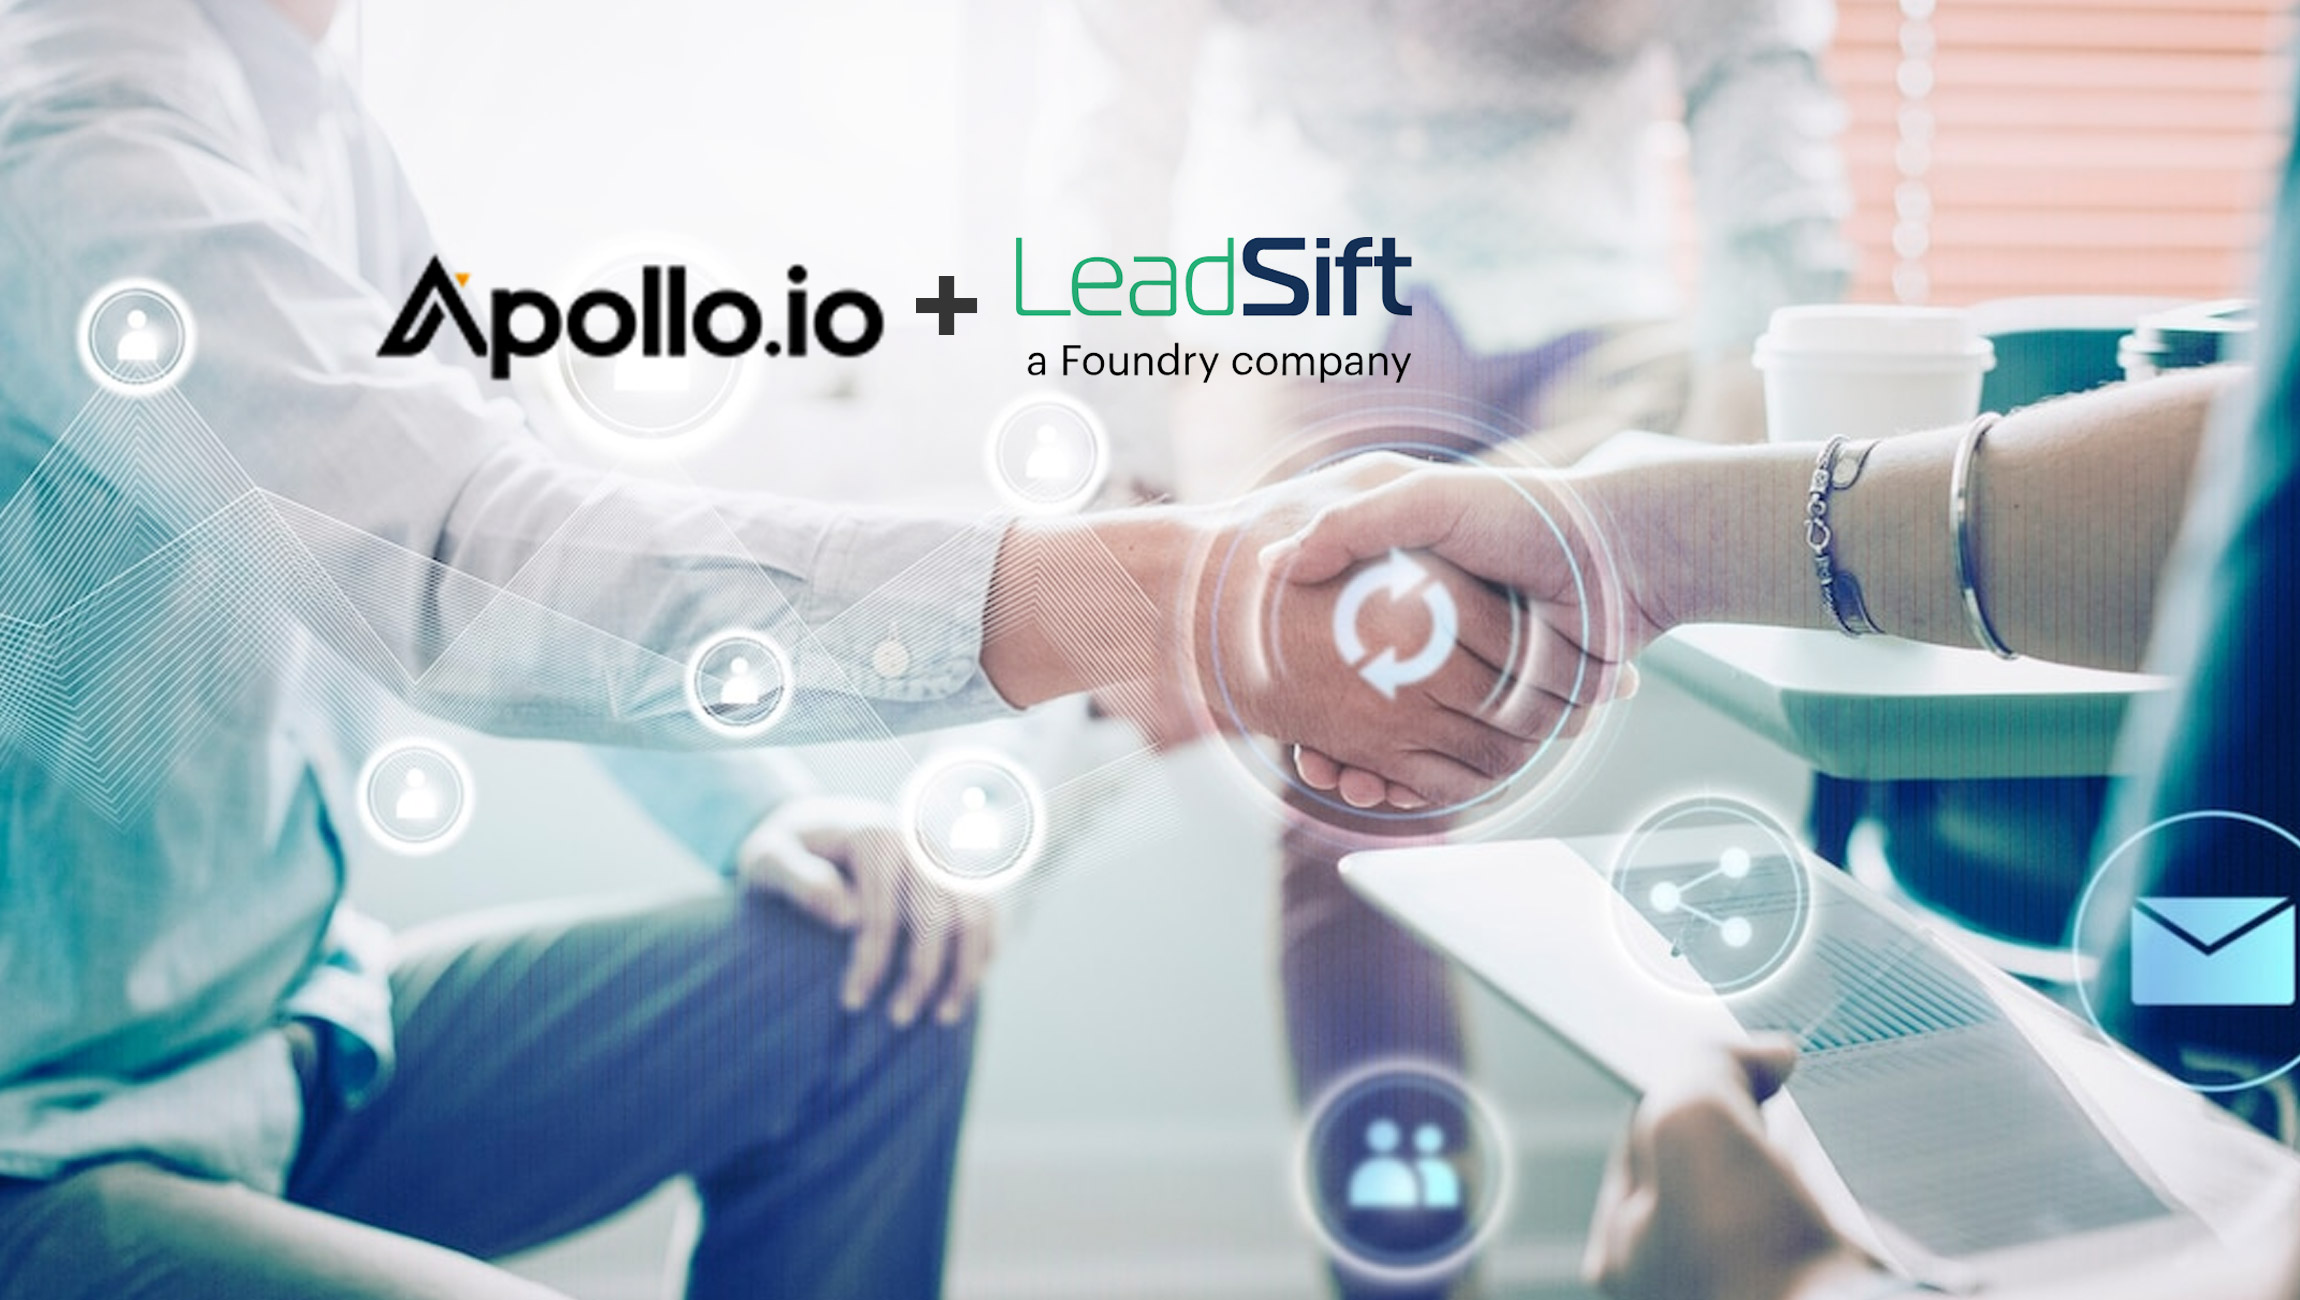 Apollo.io Is Partnering With LeadSift To Make Intent Data Accessible for All